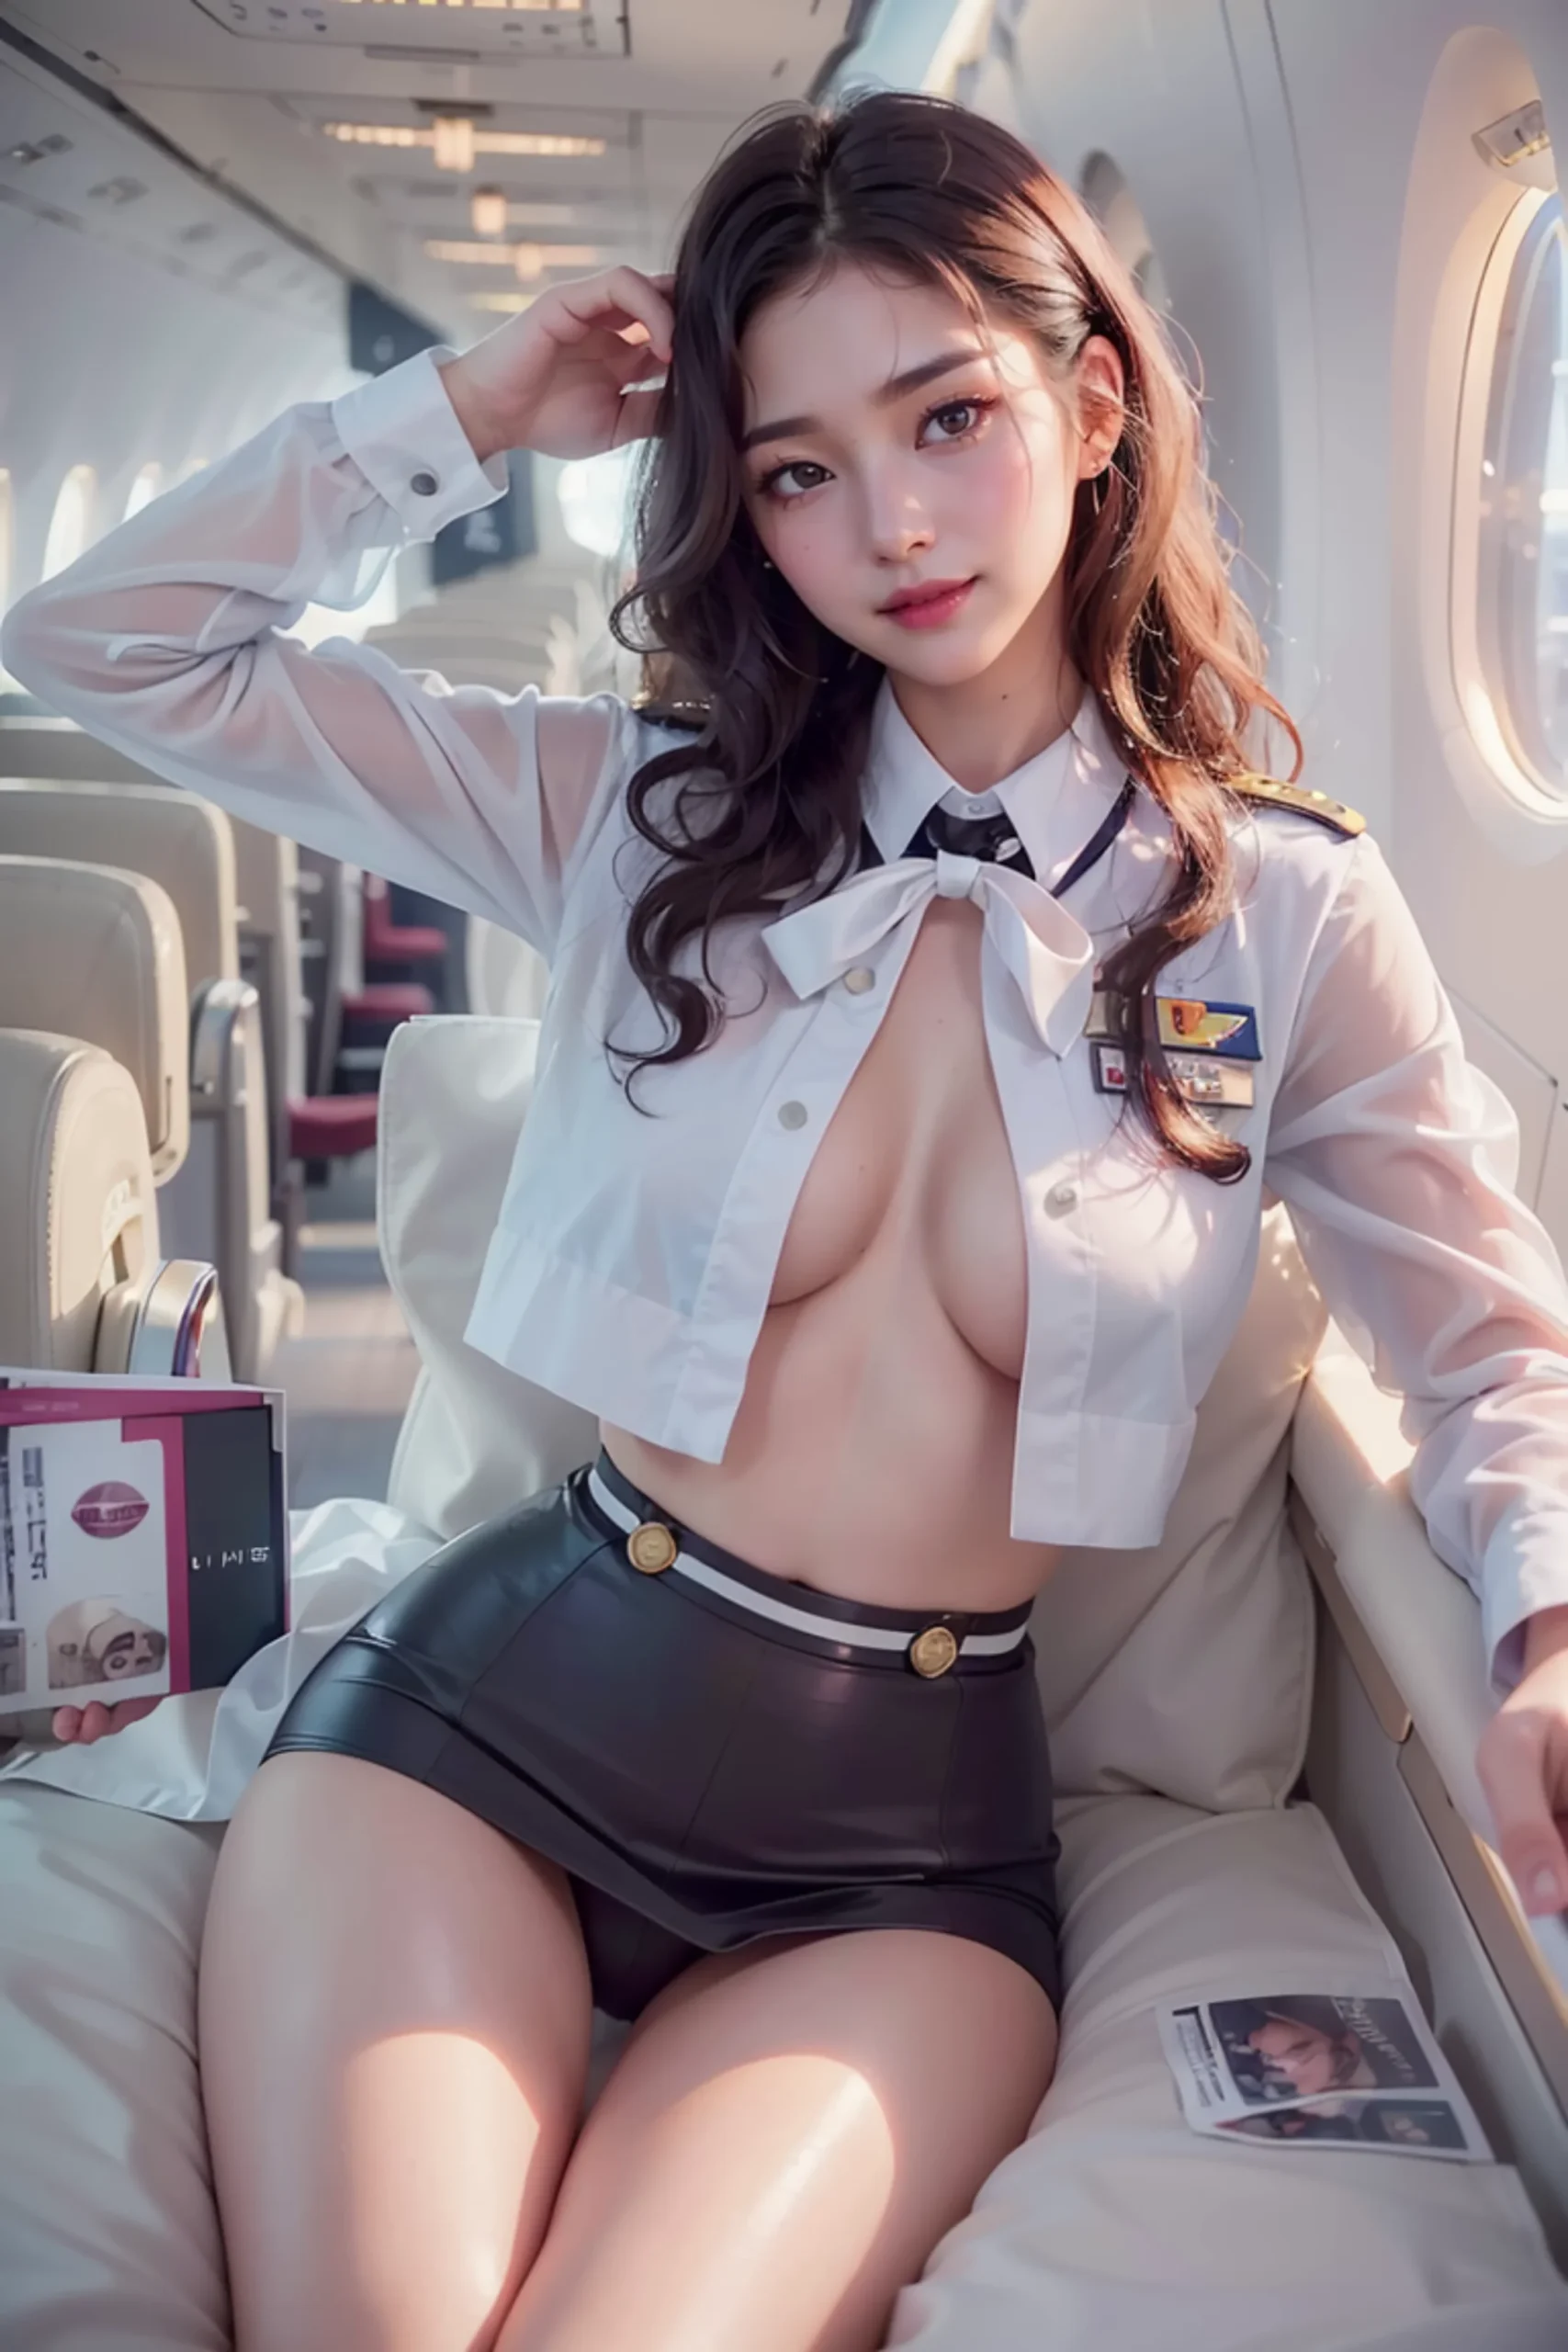 Sexy Flight Attendant Cosplay Vol. 2 Images 33